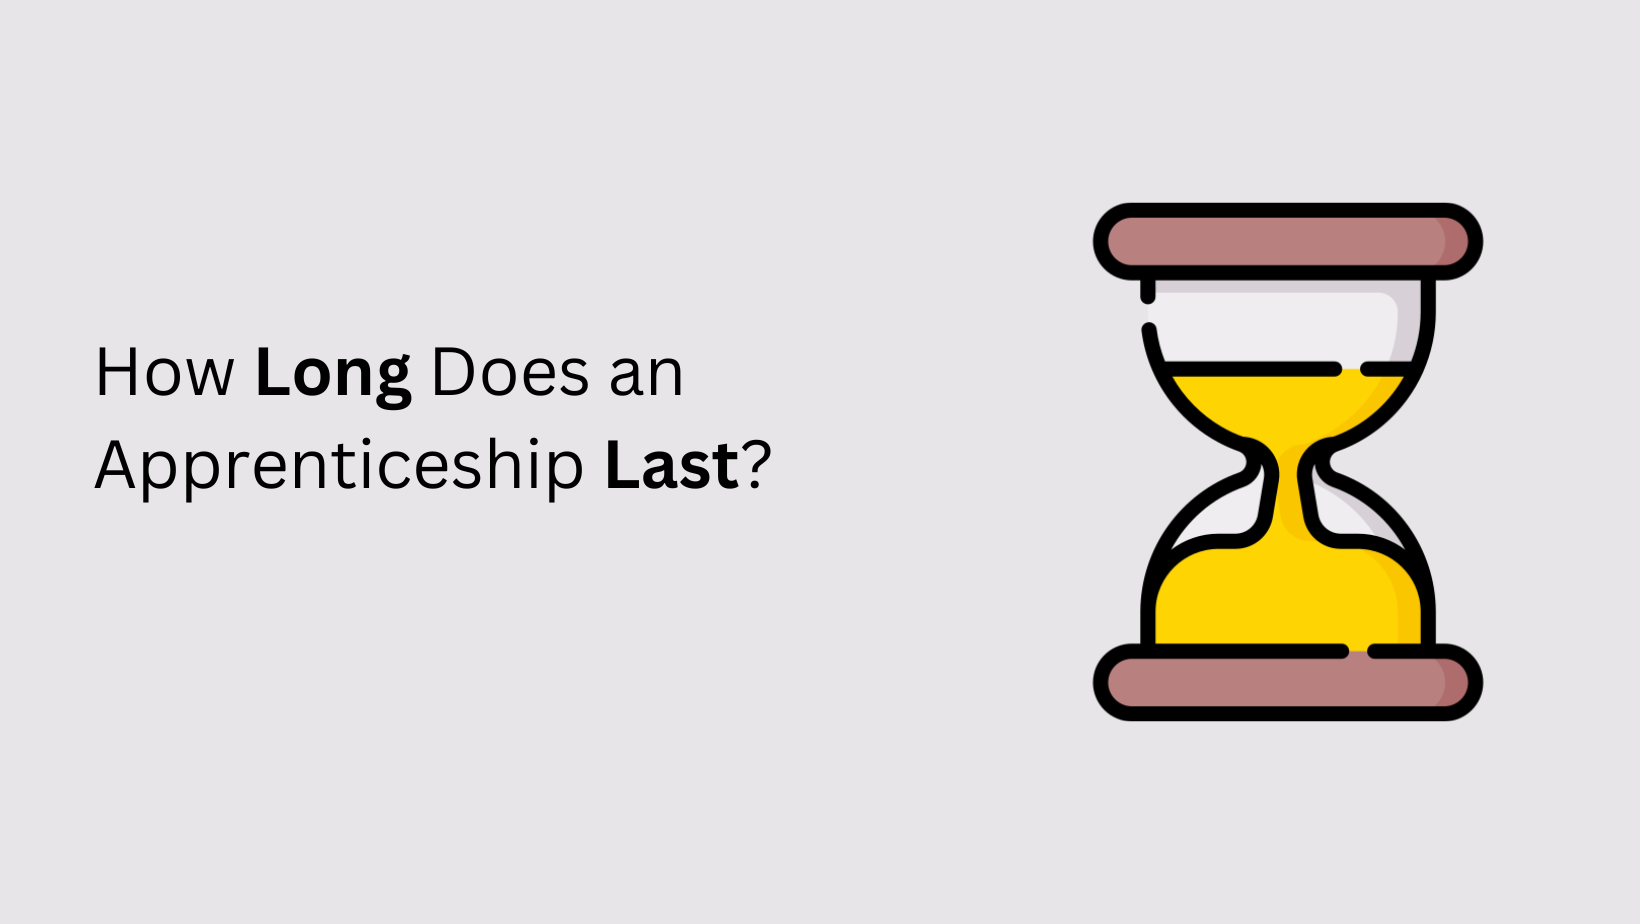 How Long Does an Apprenticeship Last